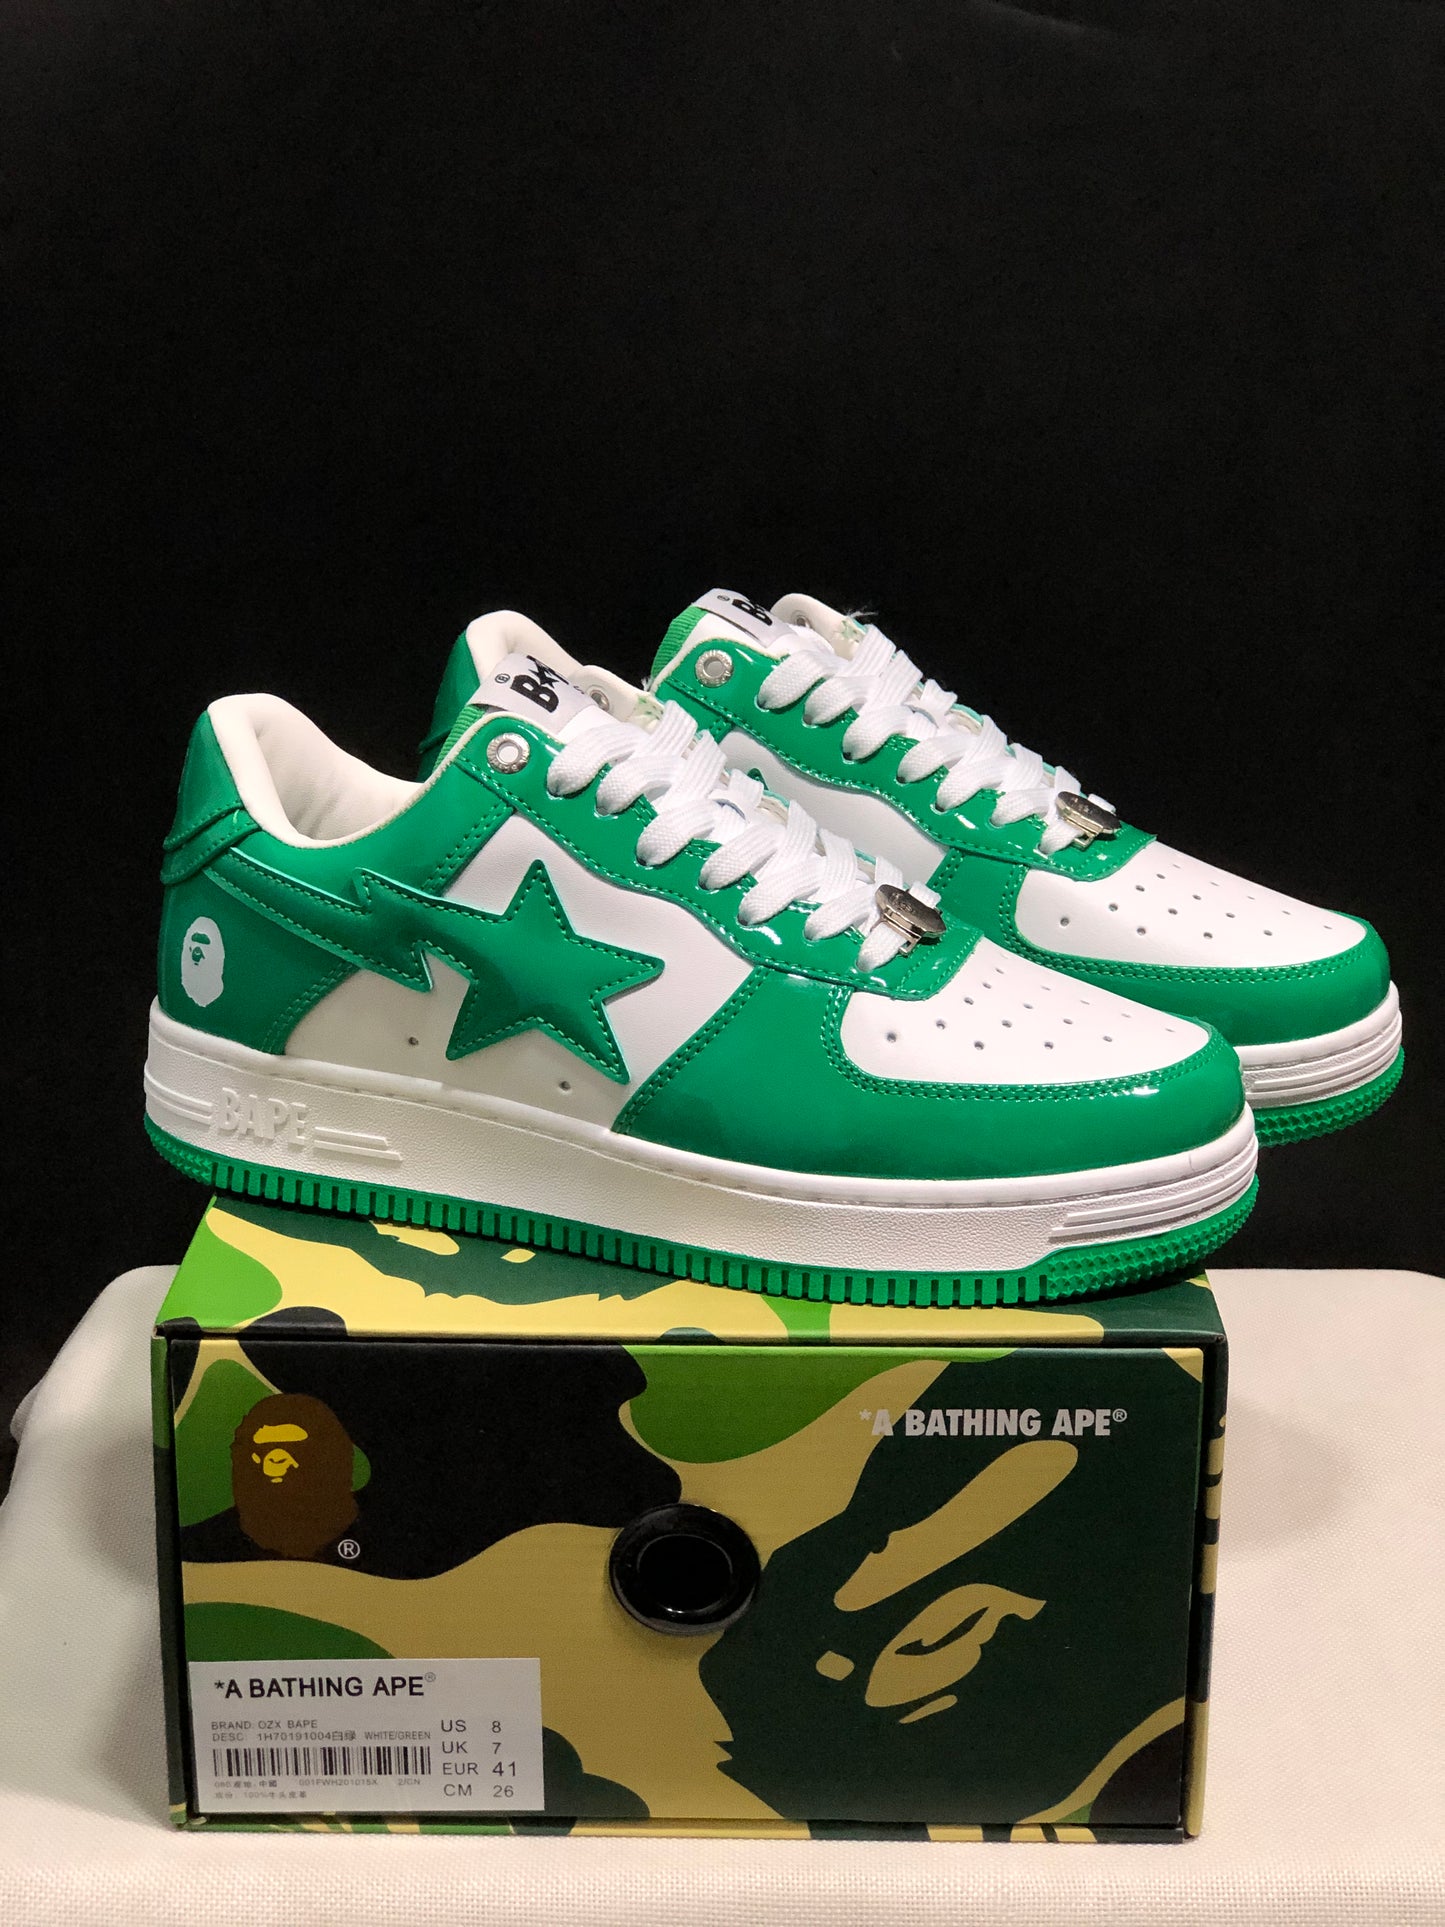 BAPE STA Low - Patent Leather Green and White